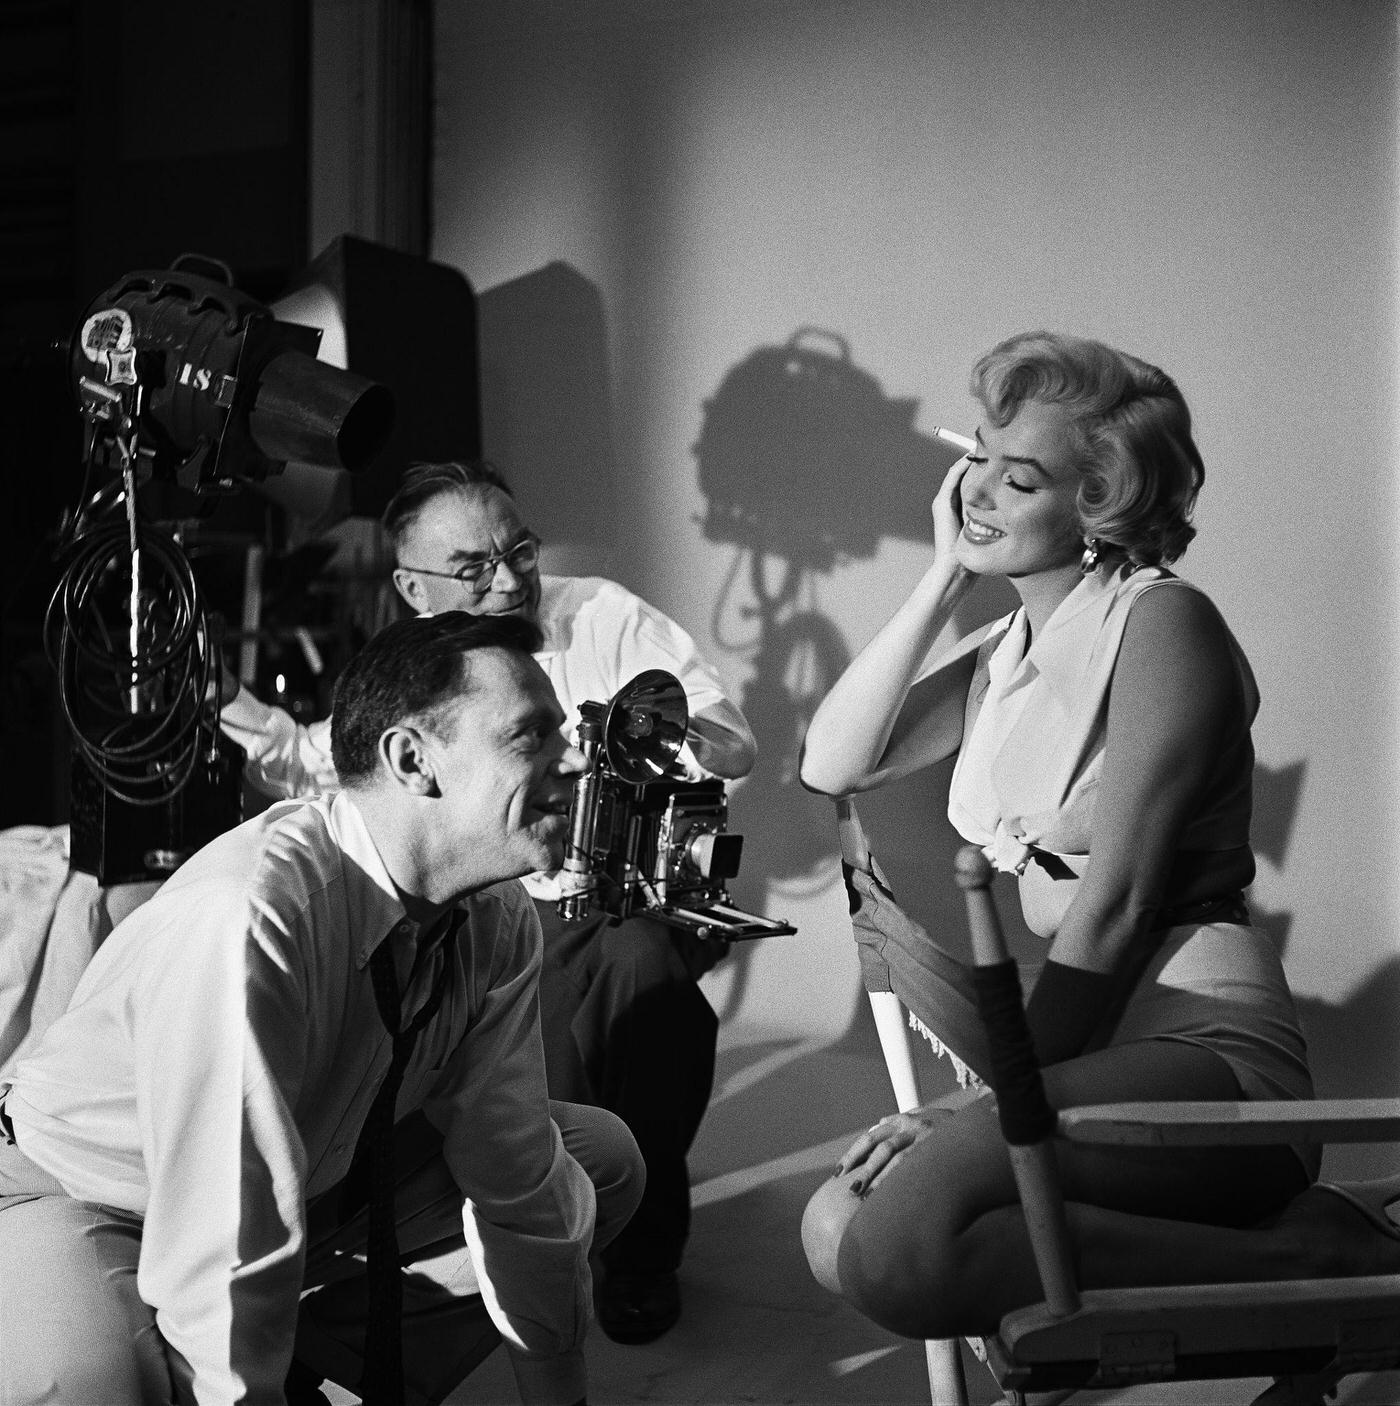 Marilyn Monroe with co-star Tom Ewell and photographer Frank Powolny in 1954 during the filming of "The Seven Year Itch"